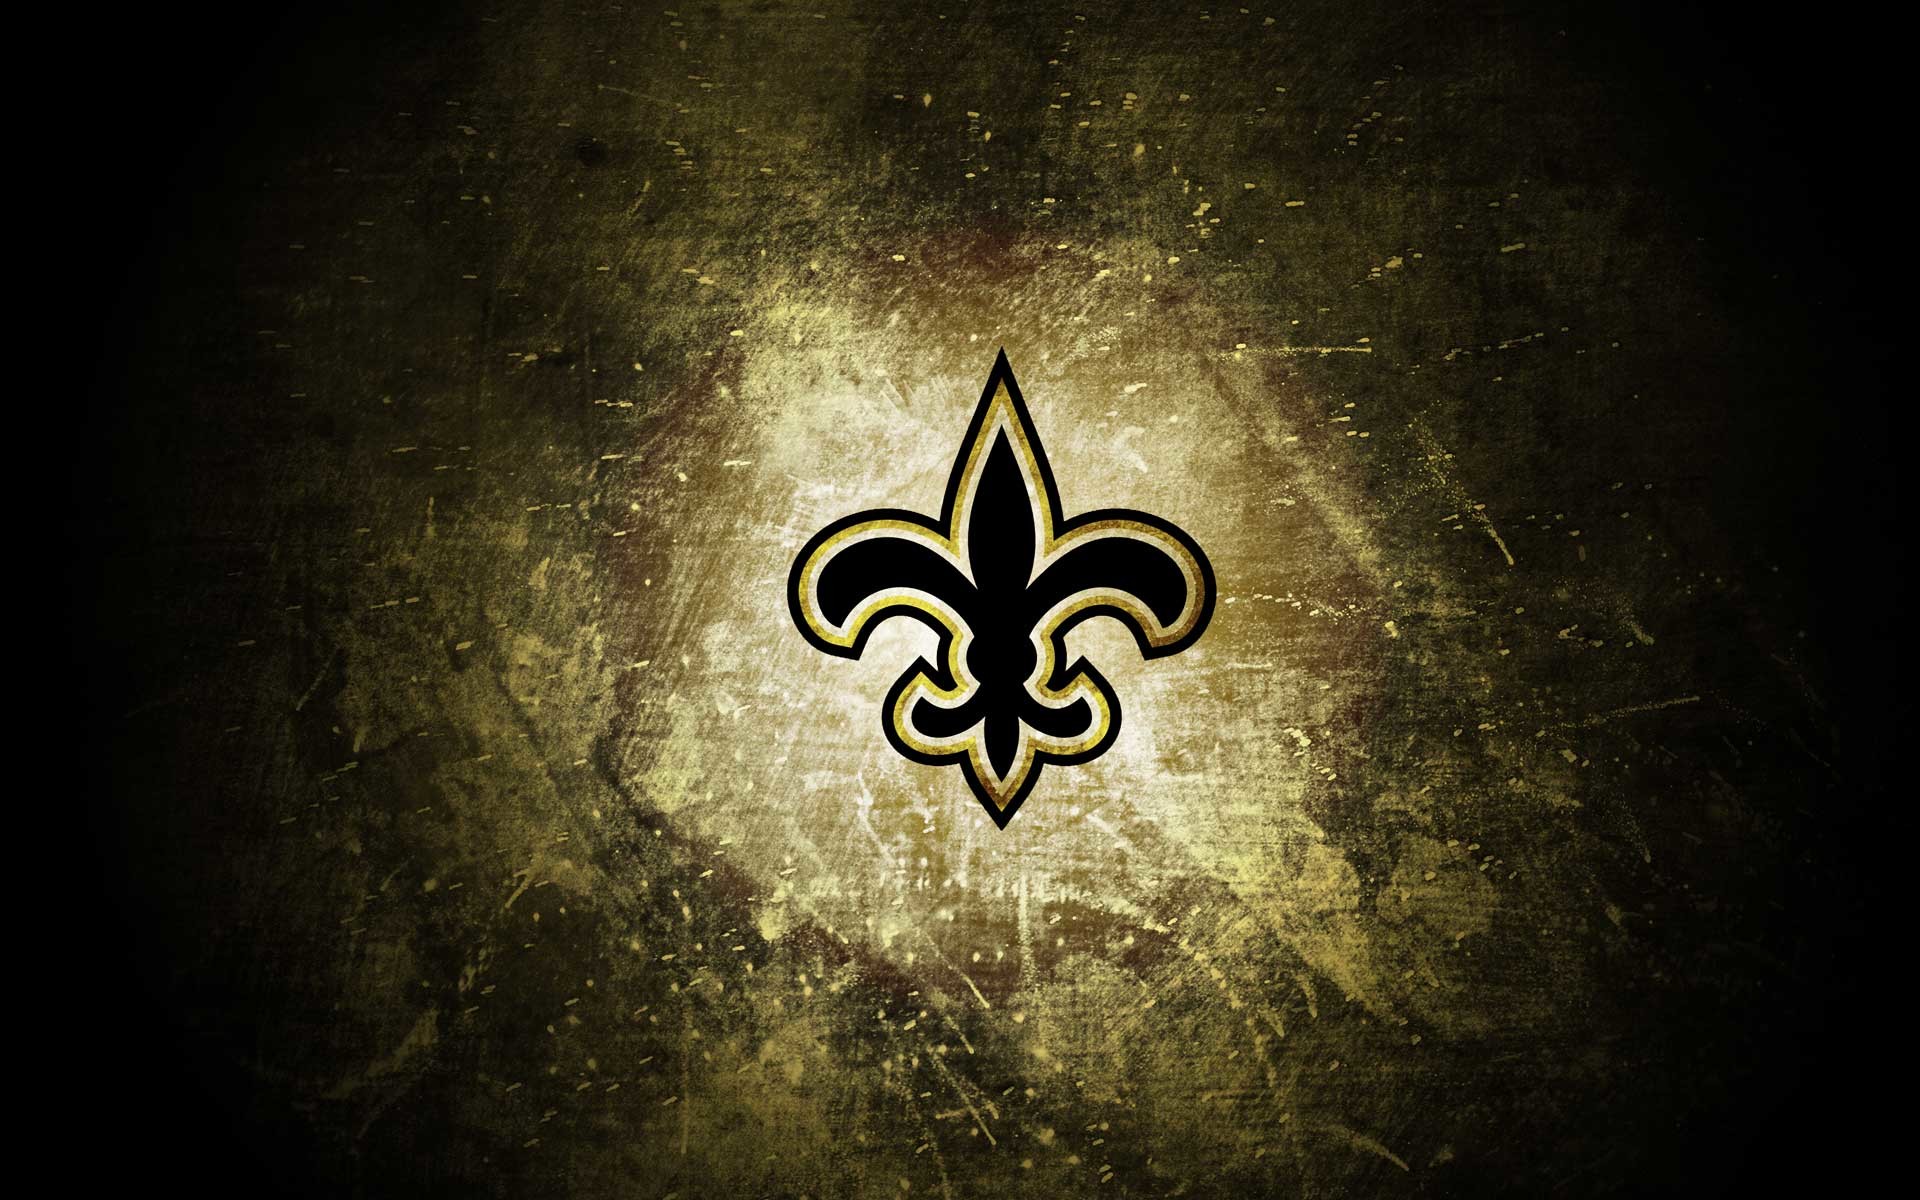 New Orleans Saints HD Wallpapers and Backgrounds